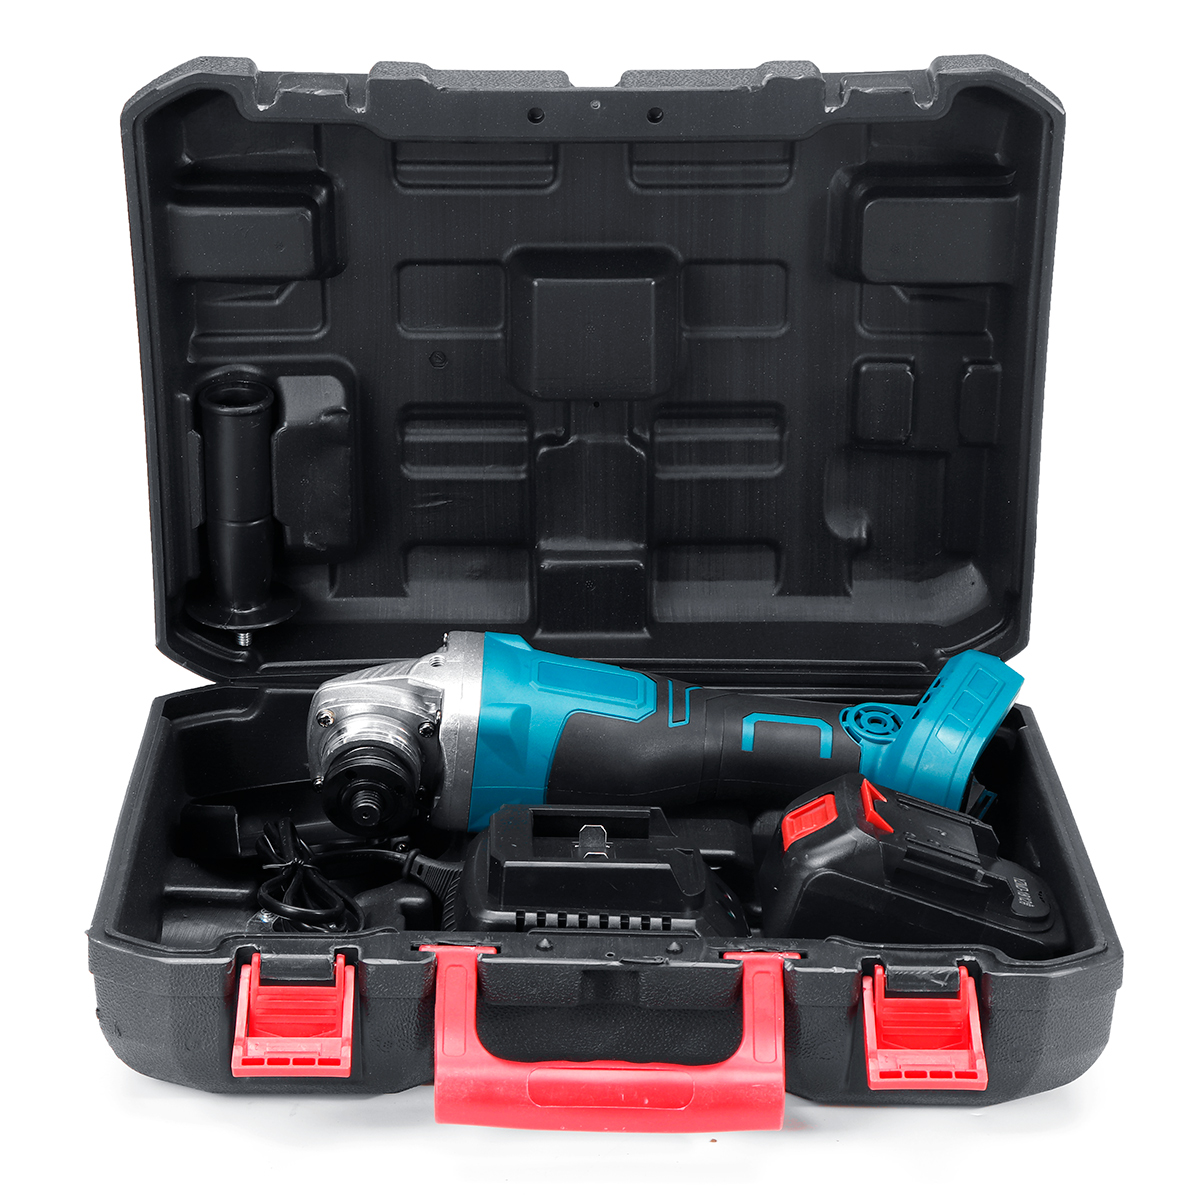 40V-128TV-29800mA-Electric-Angle-Grinder-Cordless-Grinding-Machine-Power-Cutting-Tool-Set-1518610-6